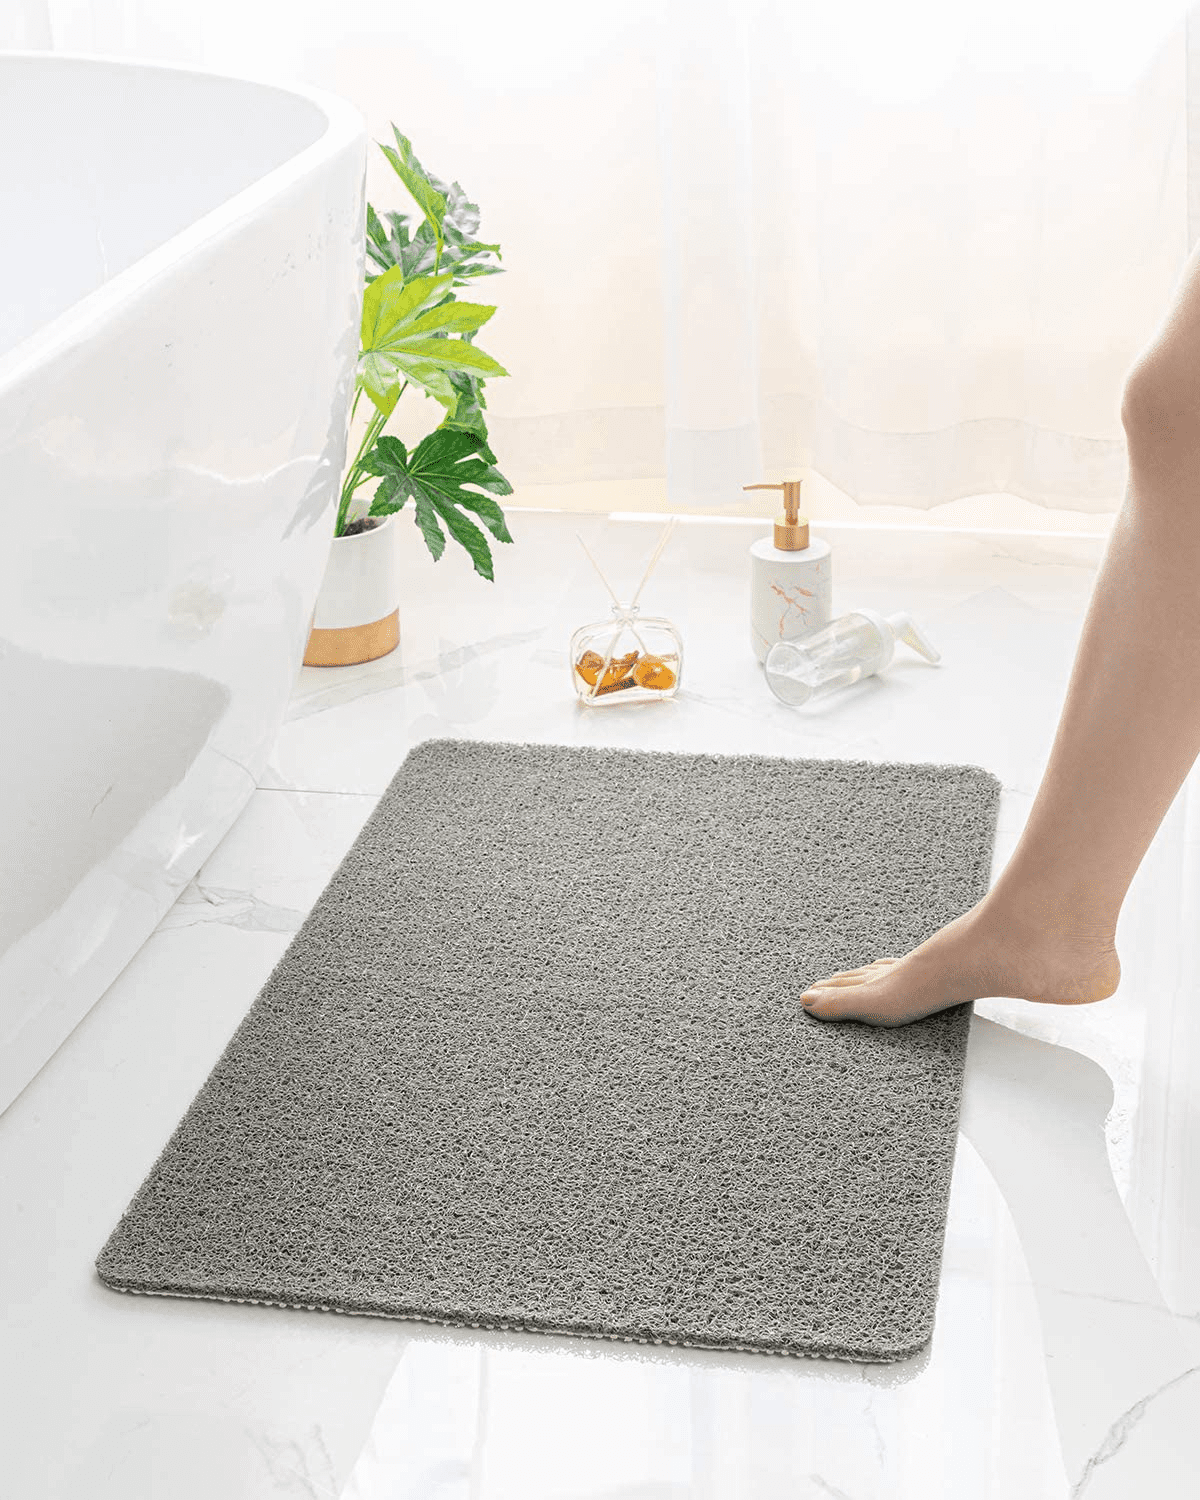 OTHWAY Loofah Mats for Shower, Non Slip Soft Textured Bath, 24x16 Inch  Bathtub Mat with Drain, Phthalate Free, Quick Drying, Soft Comfort Bathroom